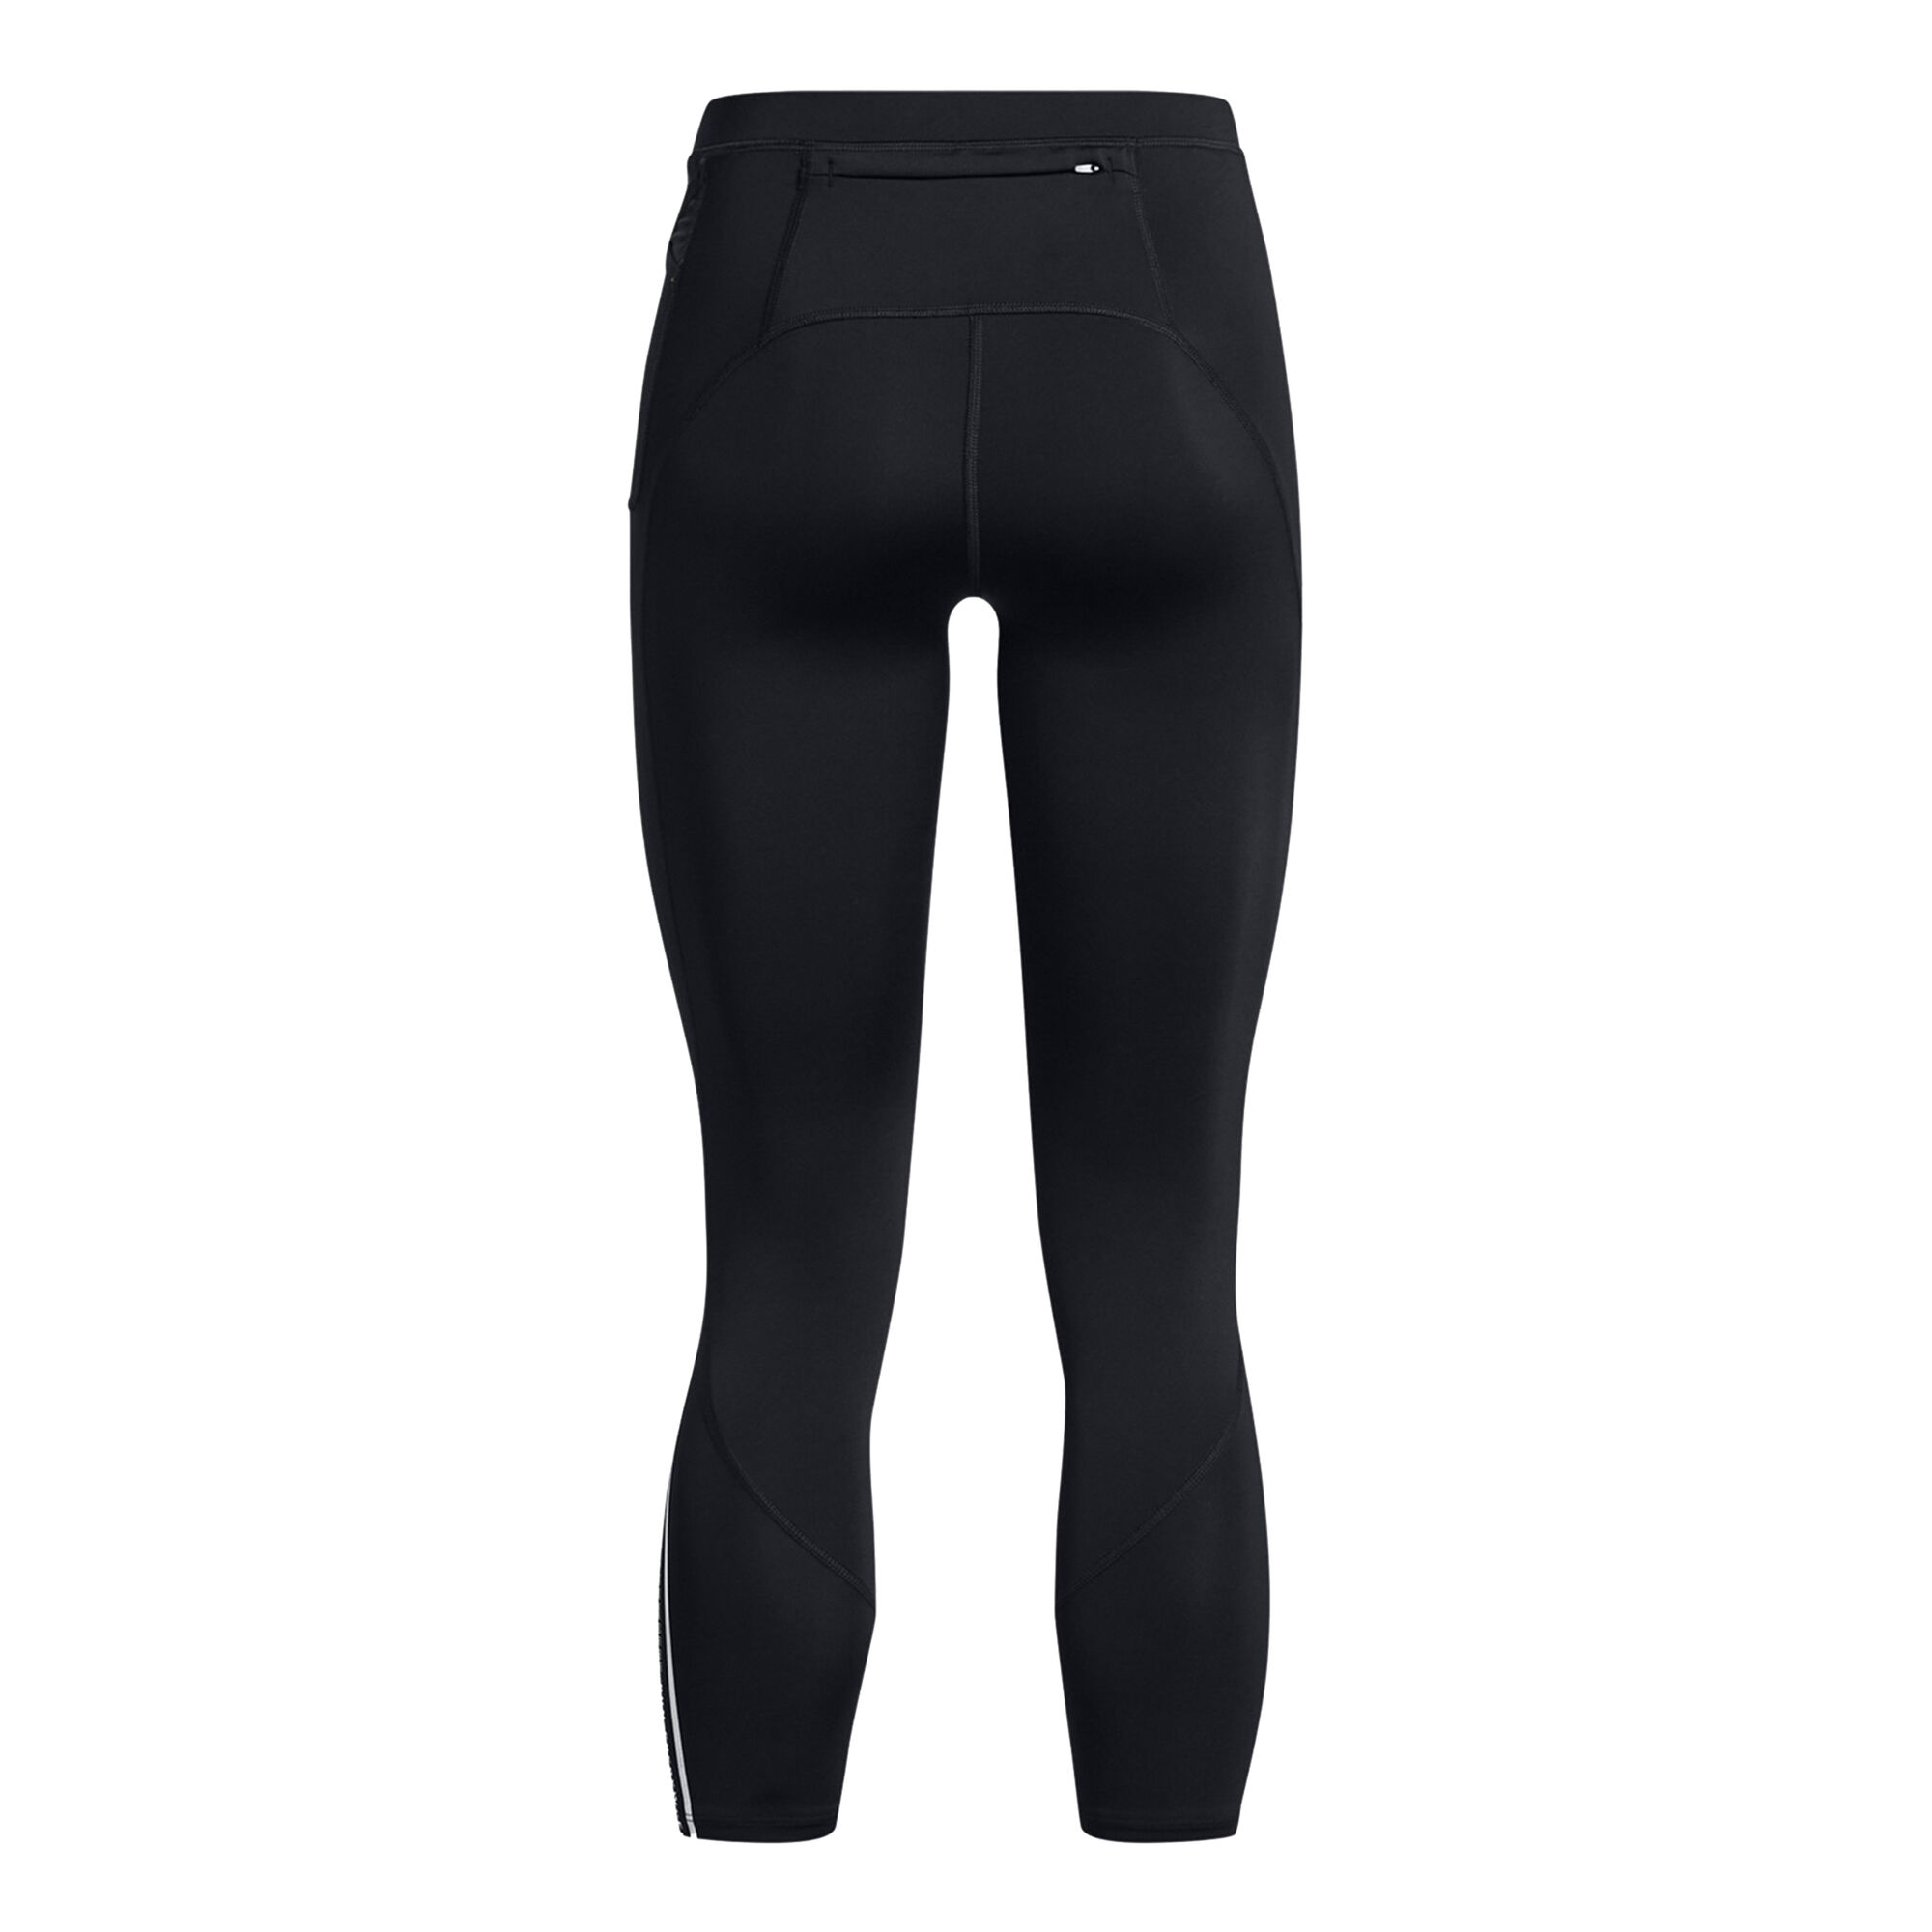 CEP Compression Tights Women's Black - Running Free Canada